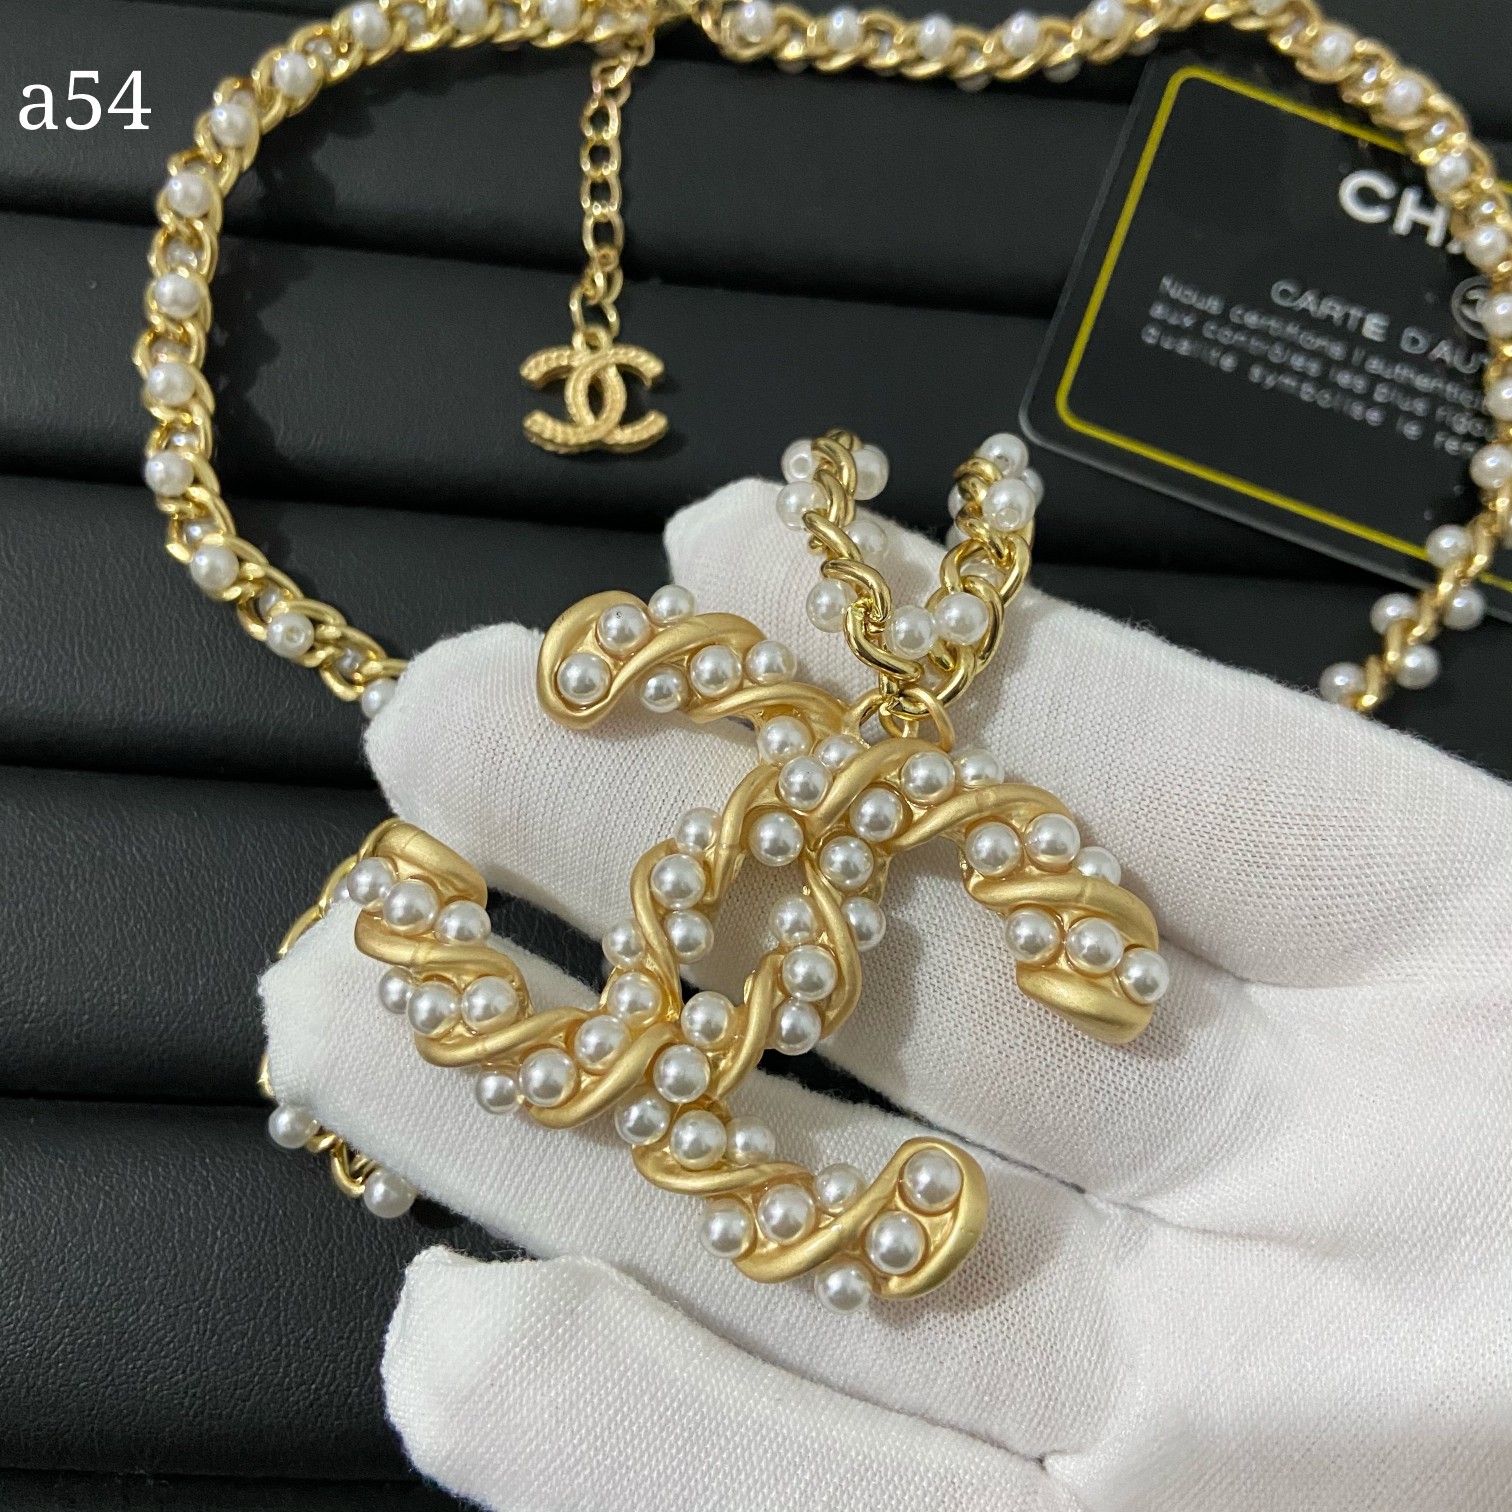 Chanel necklace 109155